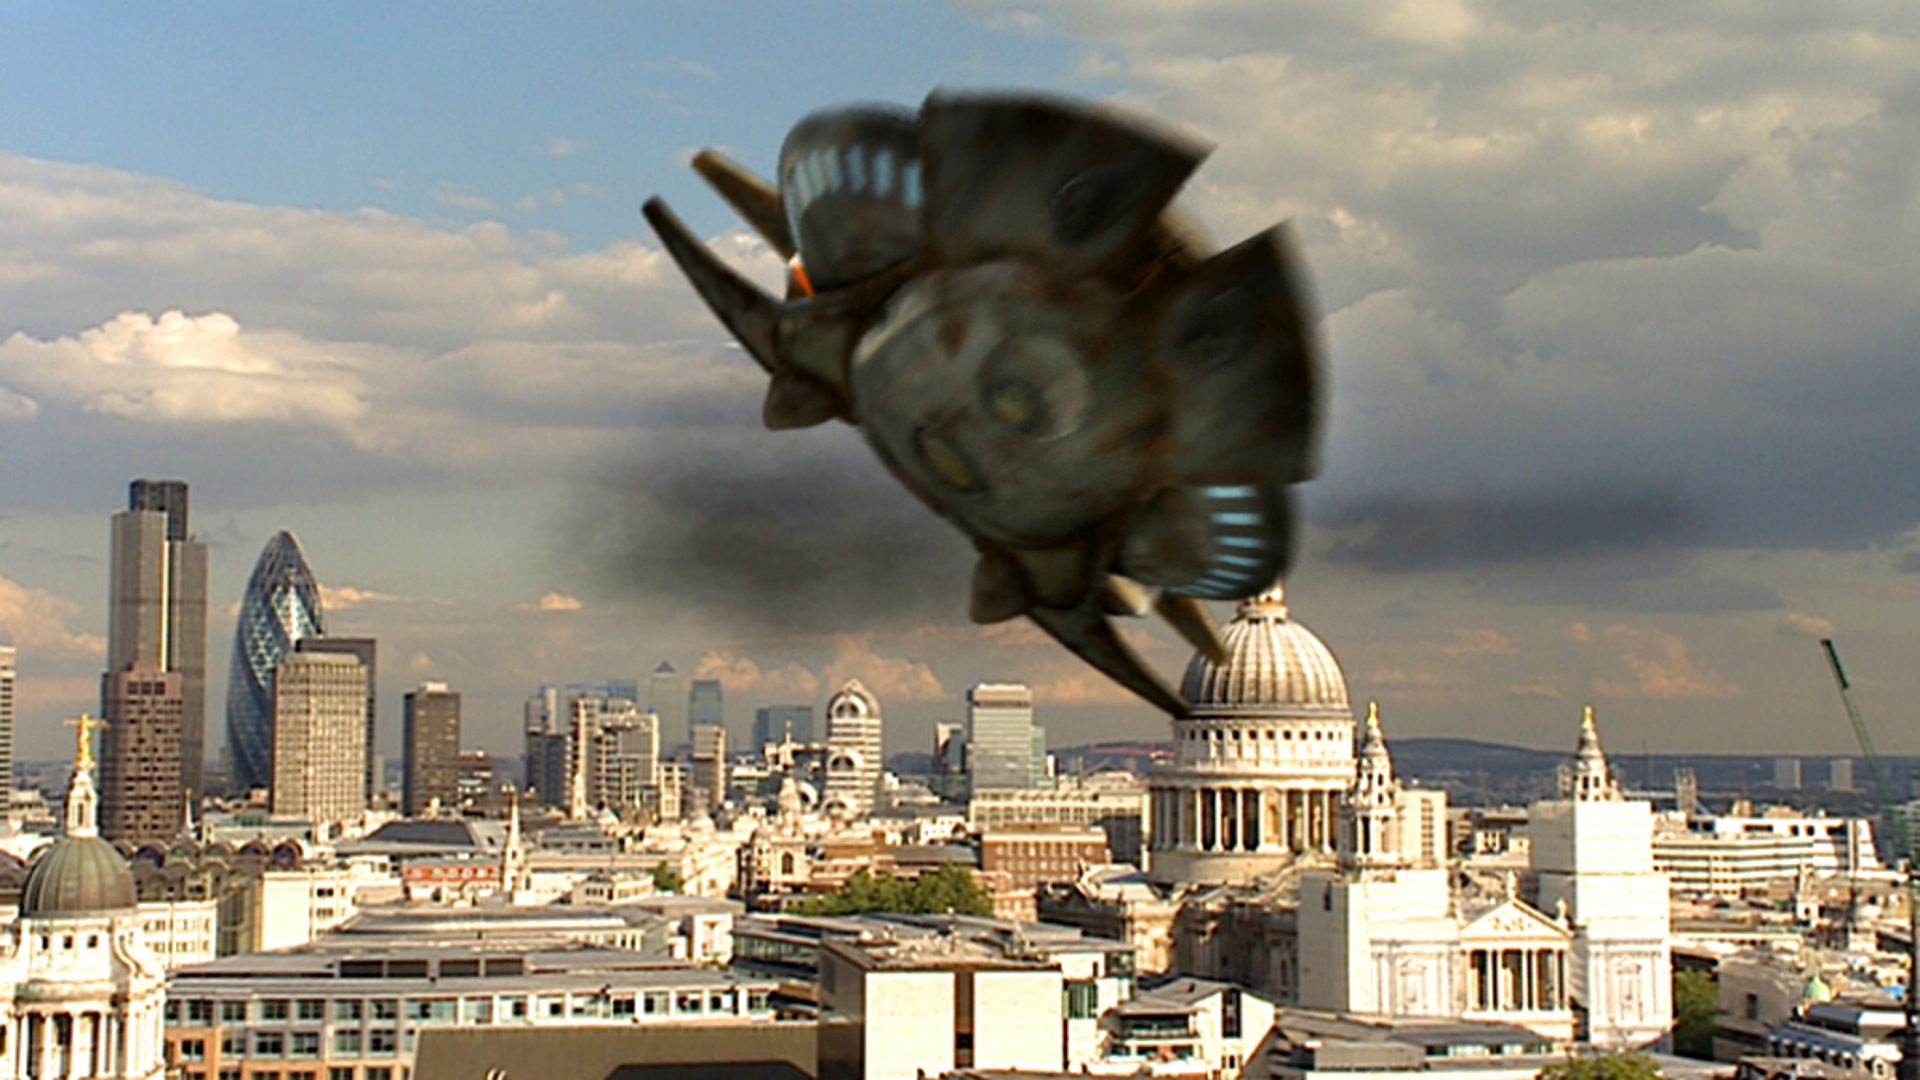 Screencap from Aliens of London: a large gray alien spaceship soars over London, seen from below.